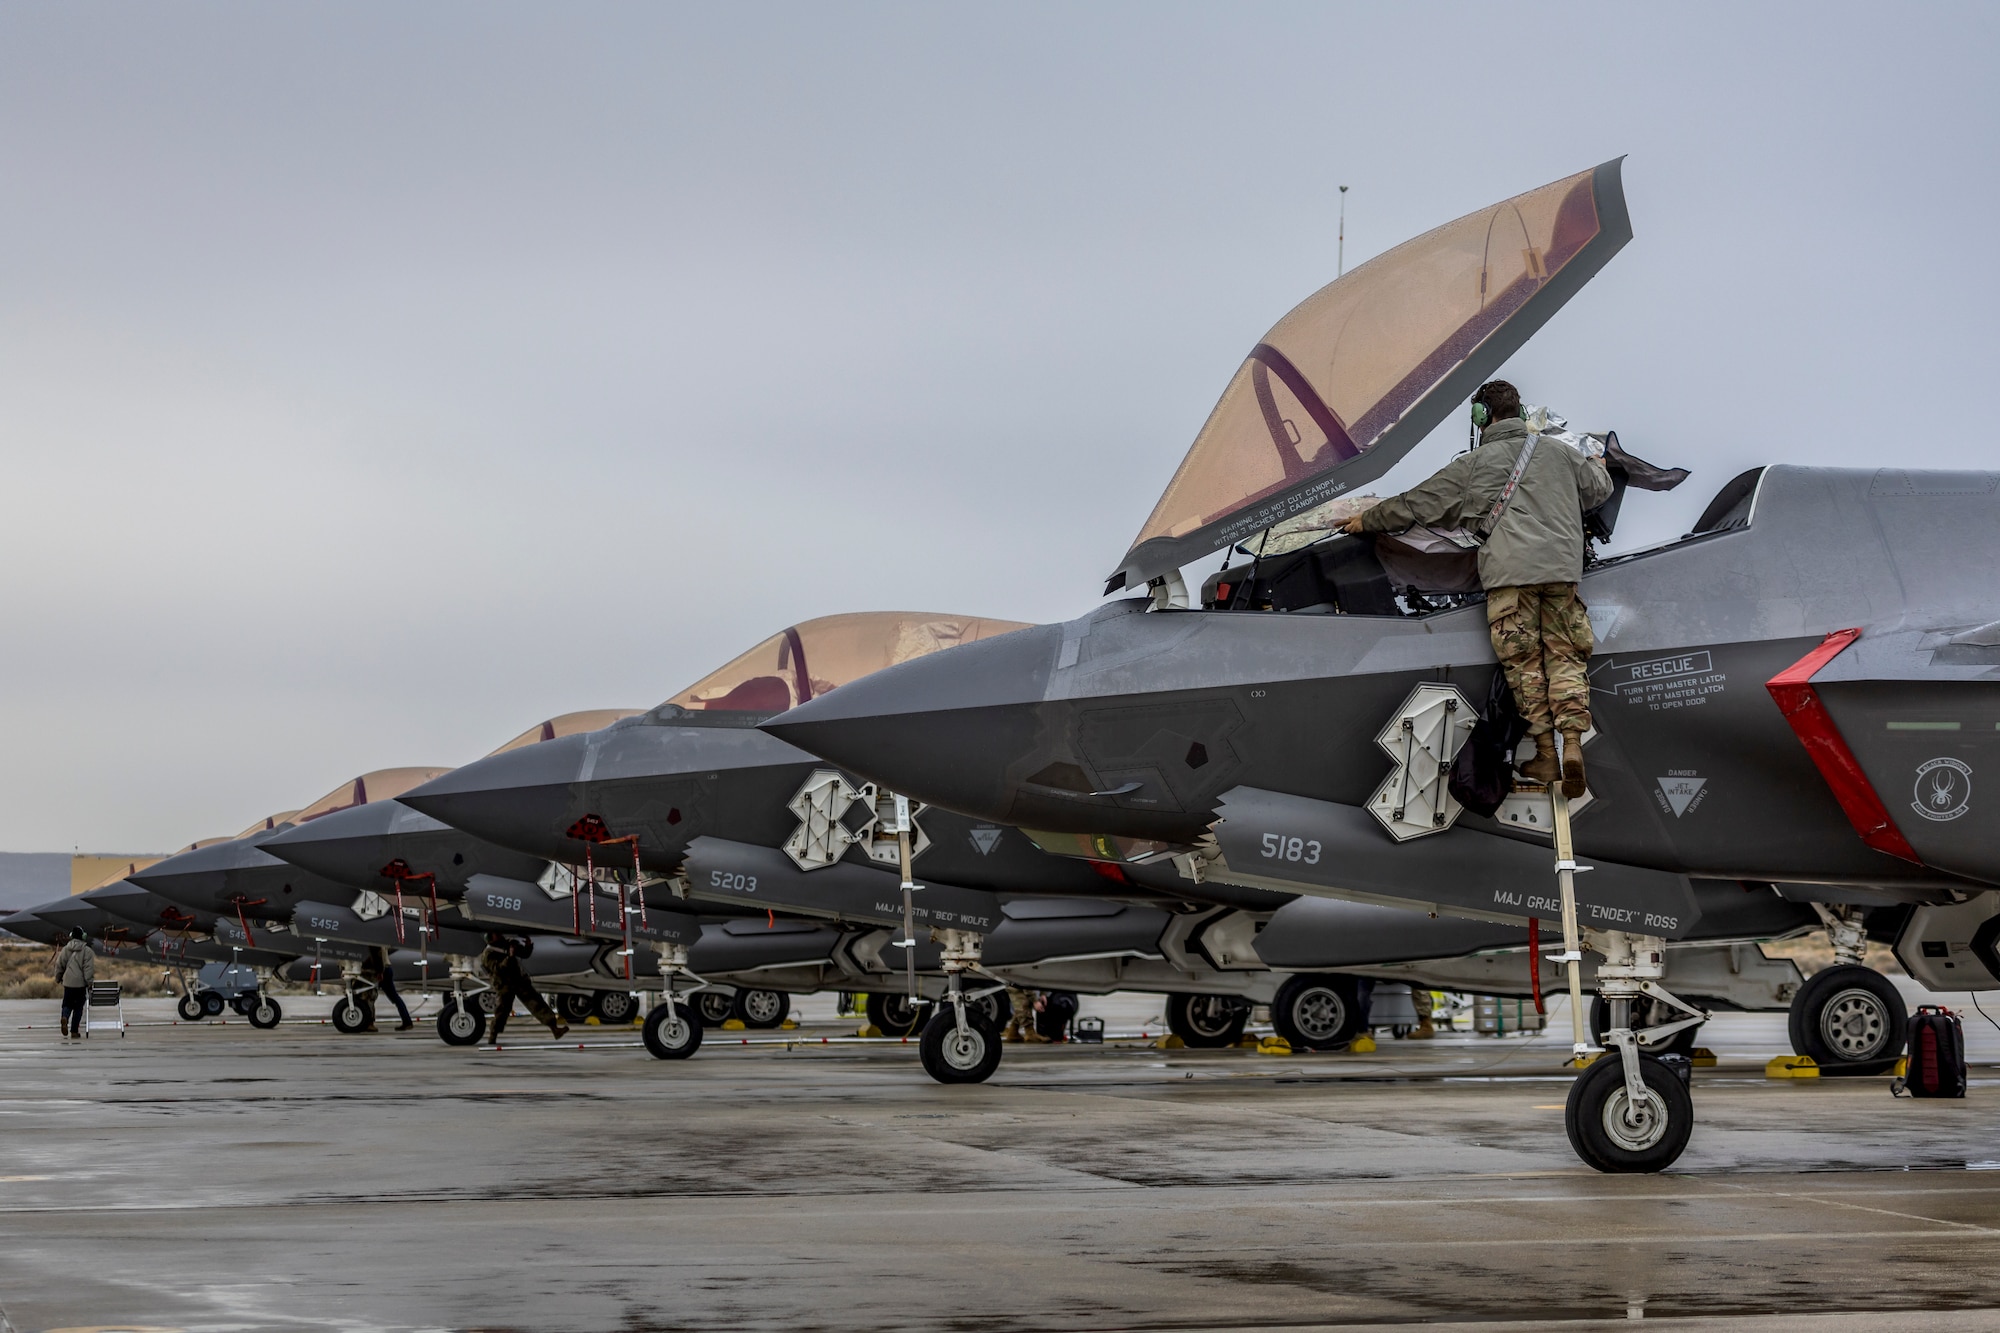 An F-35A Lightning II assigned to the 388th Fighter Wing, out of Hill Air Force Base, Utah, is readied for a training sortie during the inaugural Bamboo Eagle exercise at Edwards Air Force Base, CA., Jan 29, 2024. Bamboo Eagle provides Airmen, allies, and partners with a multidimensional, combat-representative battle-space to conduct advanced training in support of U.S. national interests. (U.S. Air Force photo by James West)